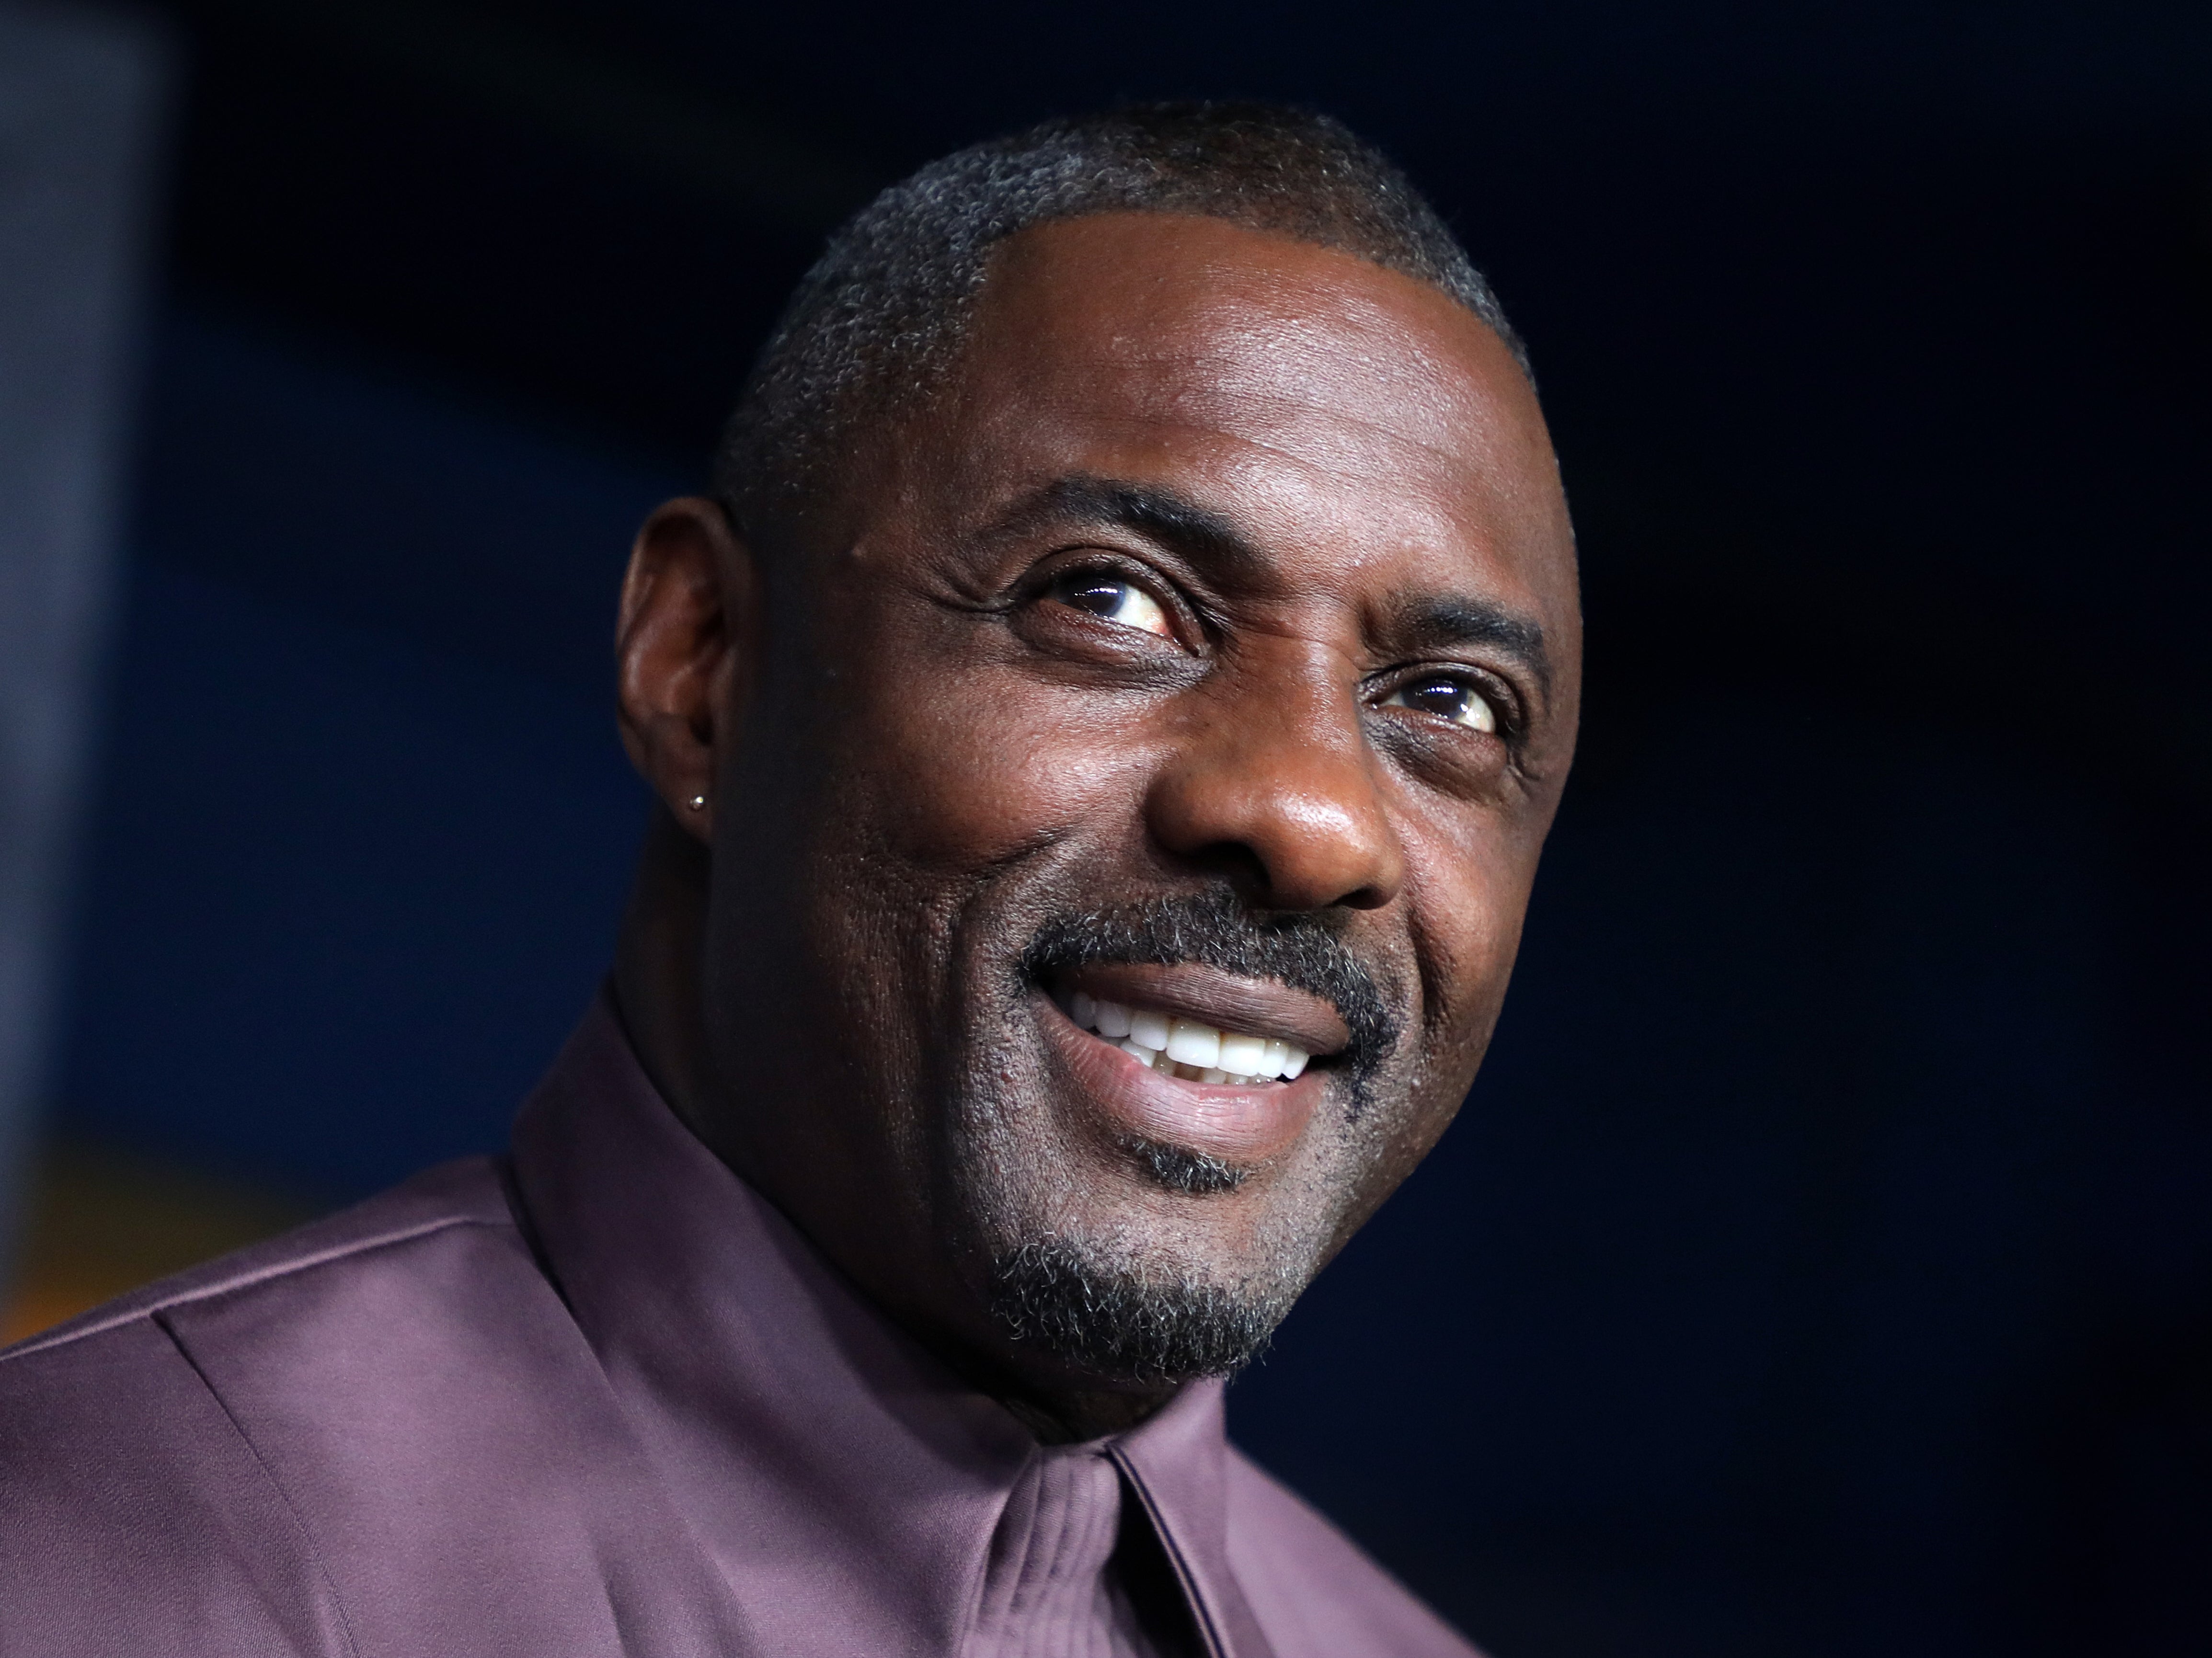 Idris Elba, once tipped to play James Bond, photographed at the global premiere of ‘Luther: The Fallen Sun’